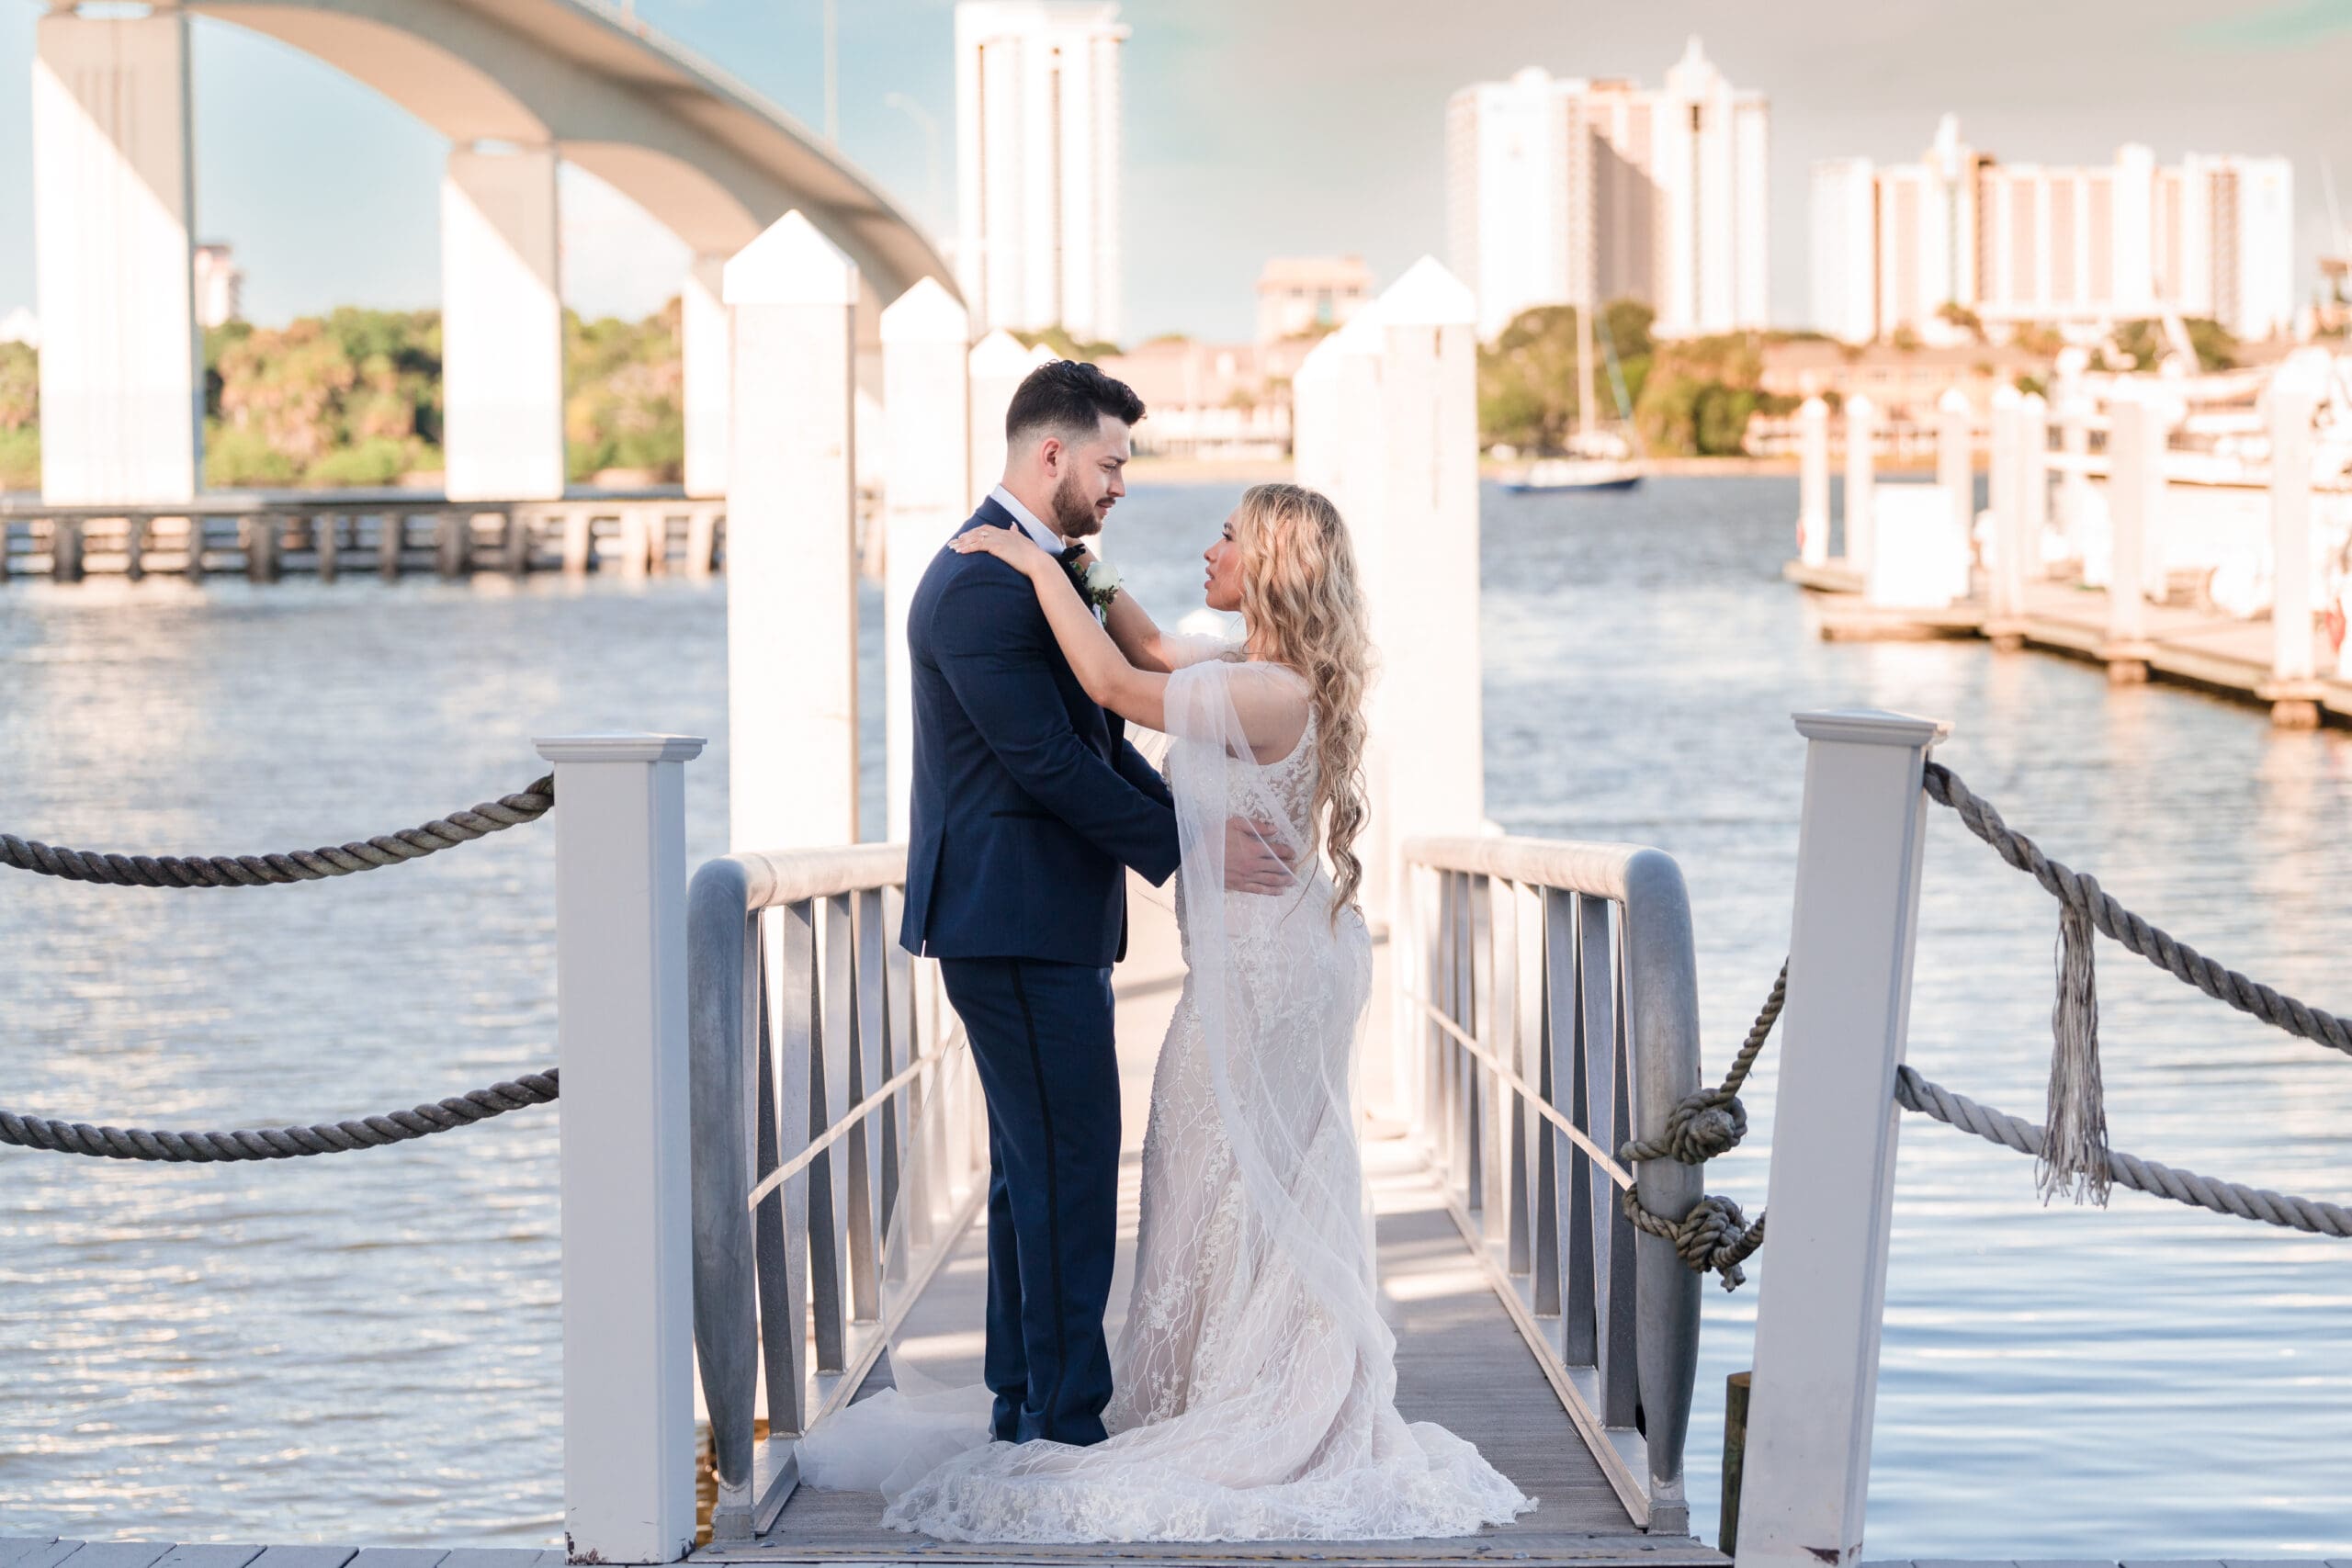 Jenn and Jazer embracing on the dock at Sunset Harbor, with ocean in the background.